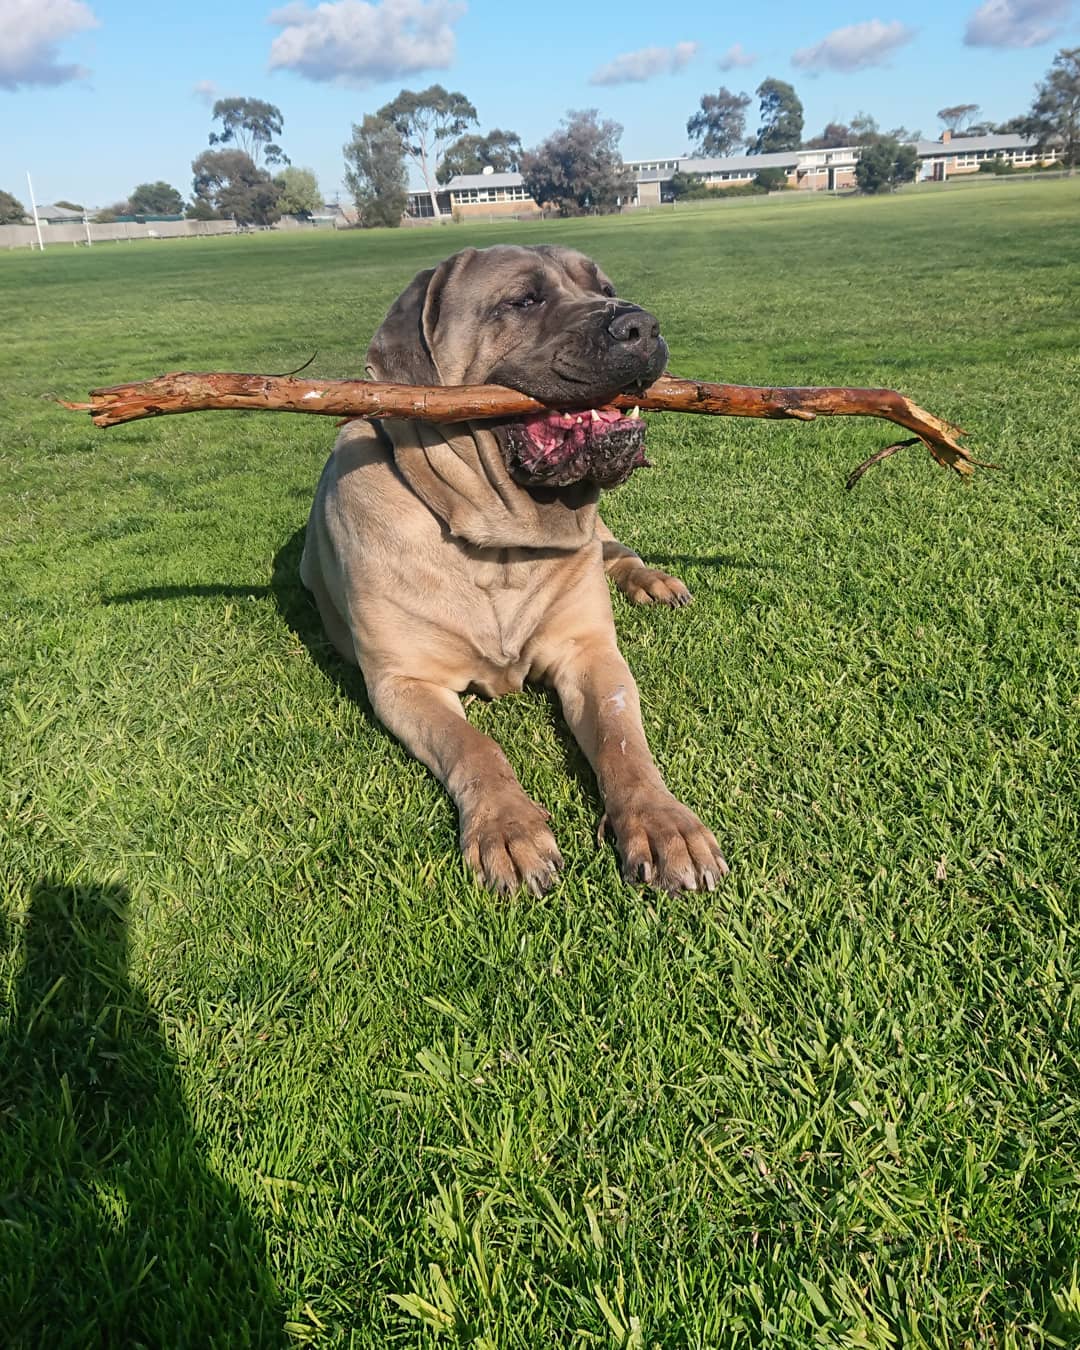 A Neapolitan Mastif lying on the grass with a stick in its mouth